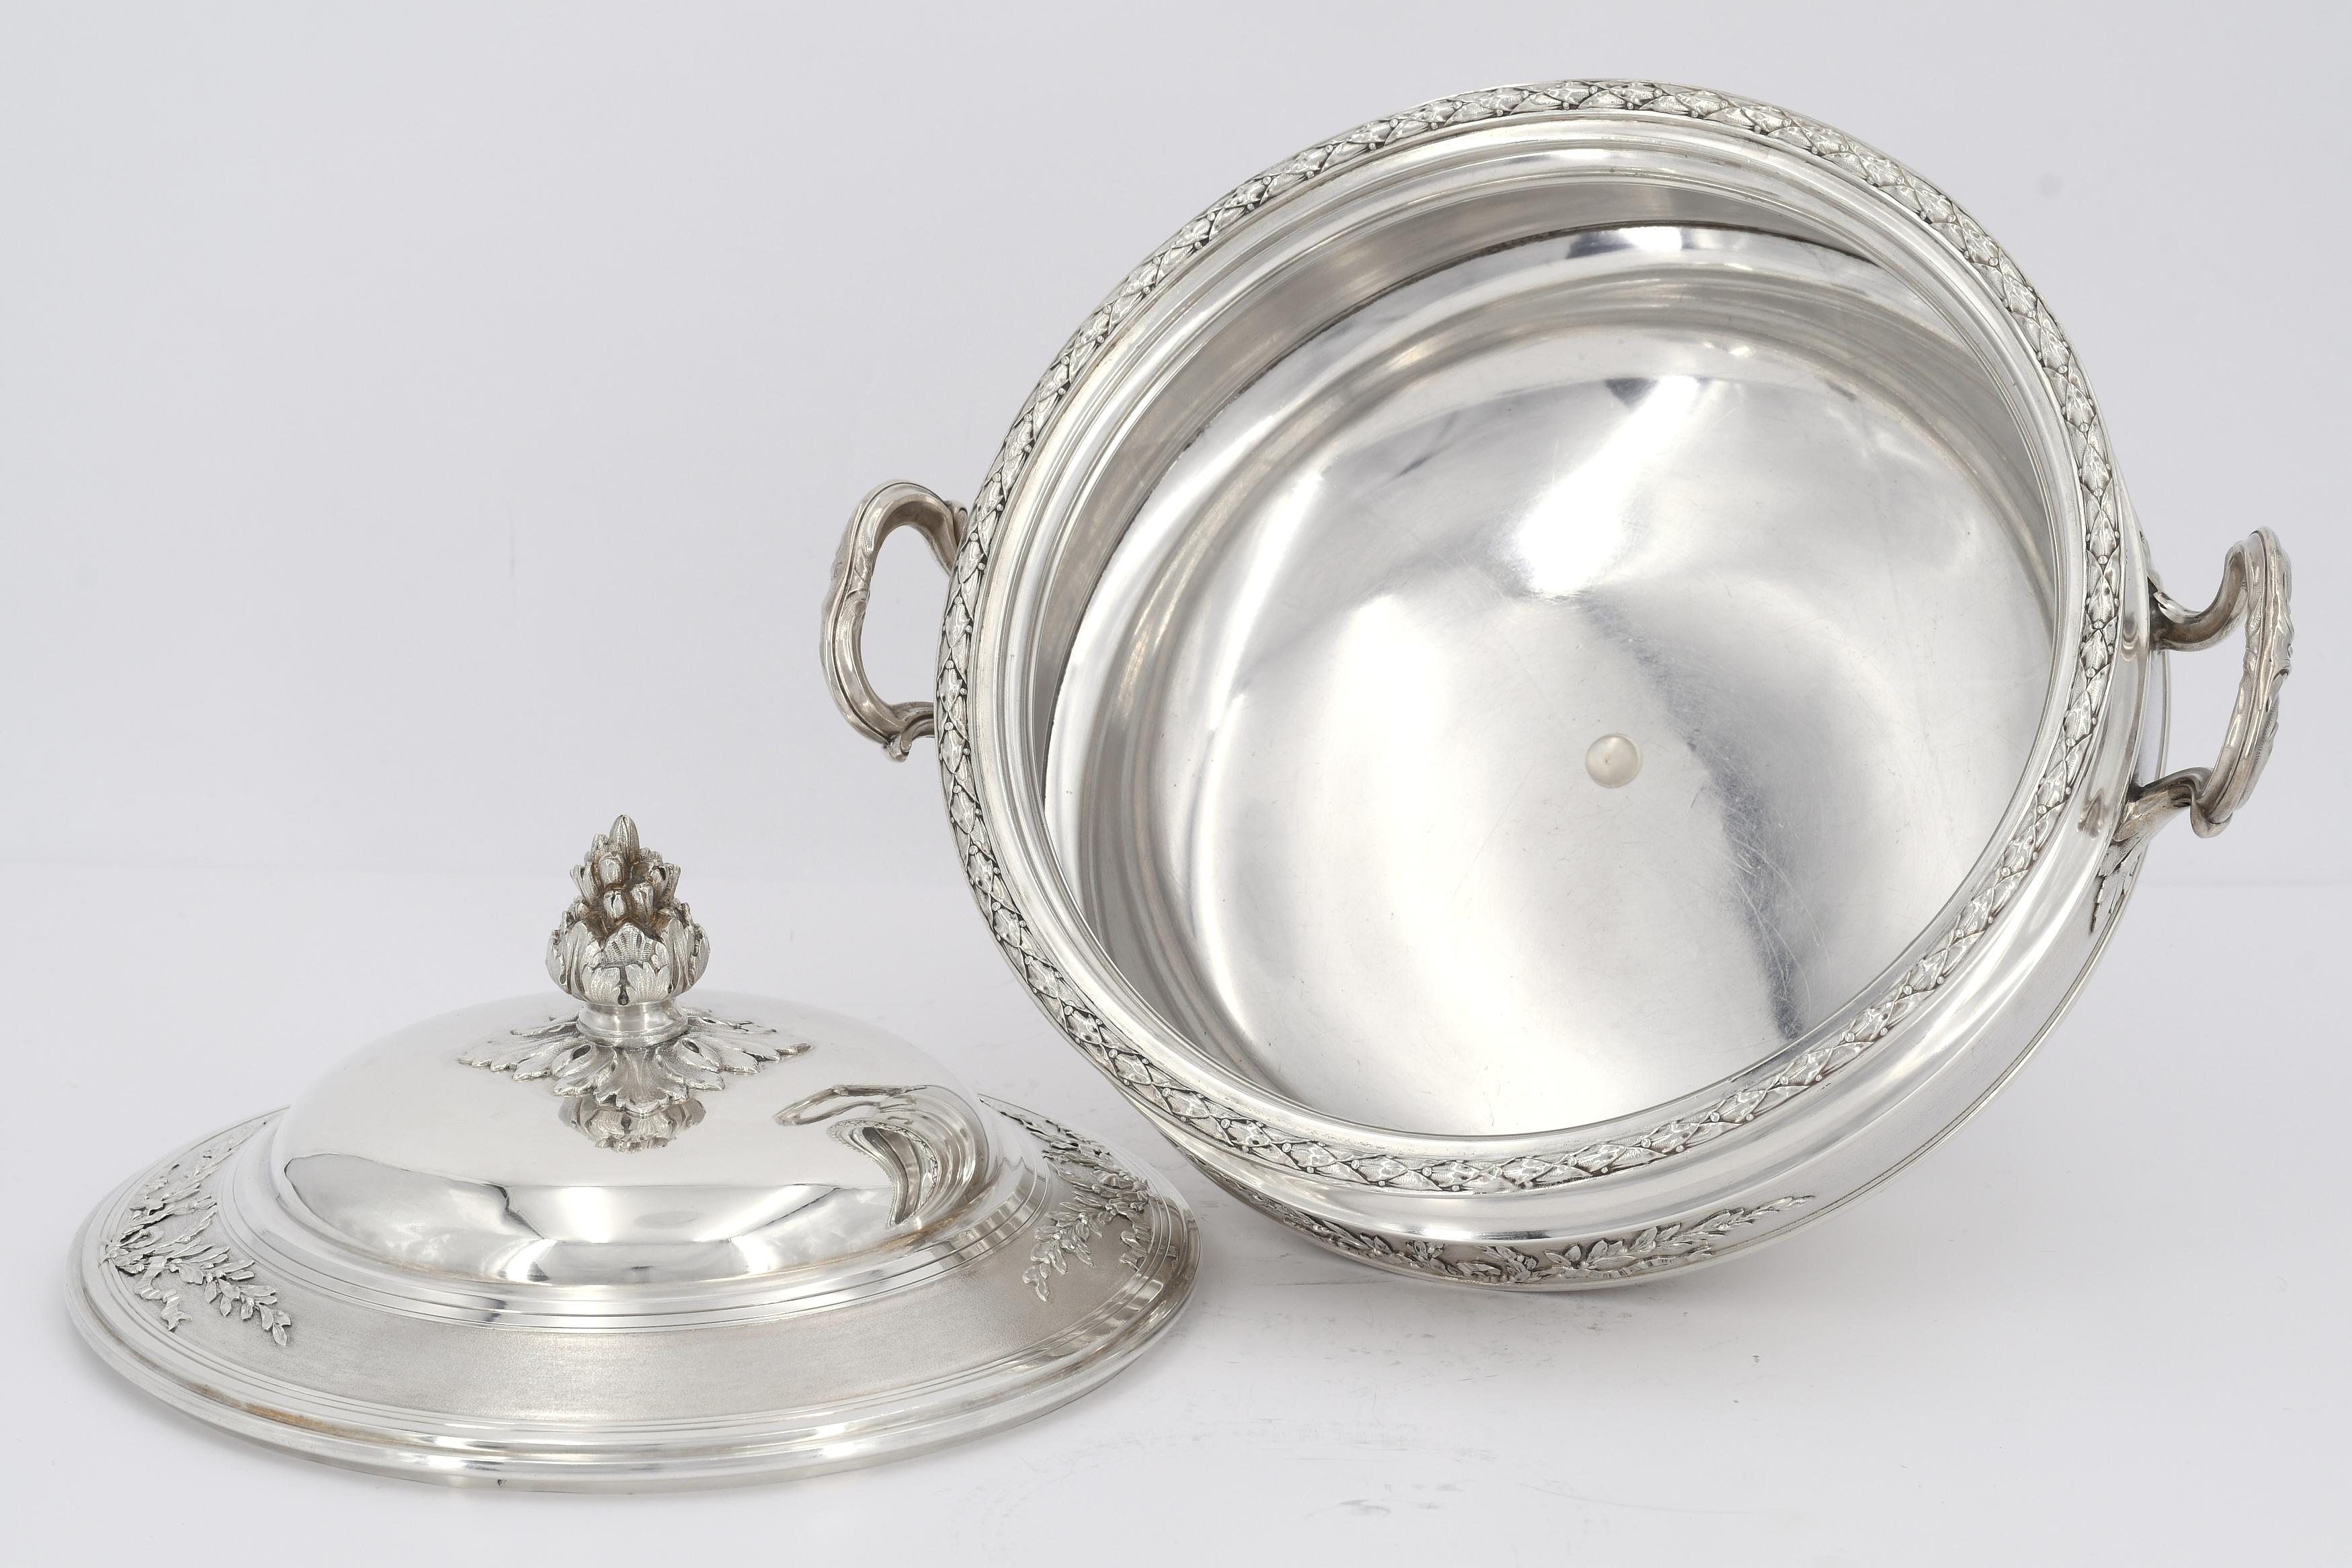 Silver vegetable bowl with laurel wreaths and floral knob - Image 6 of 8